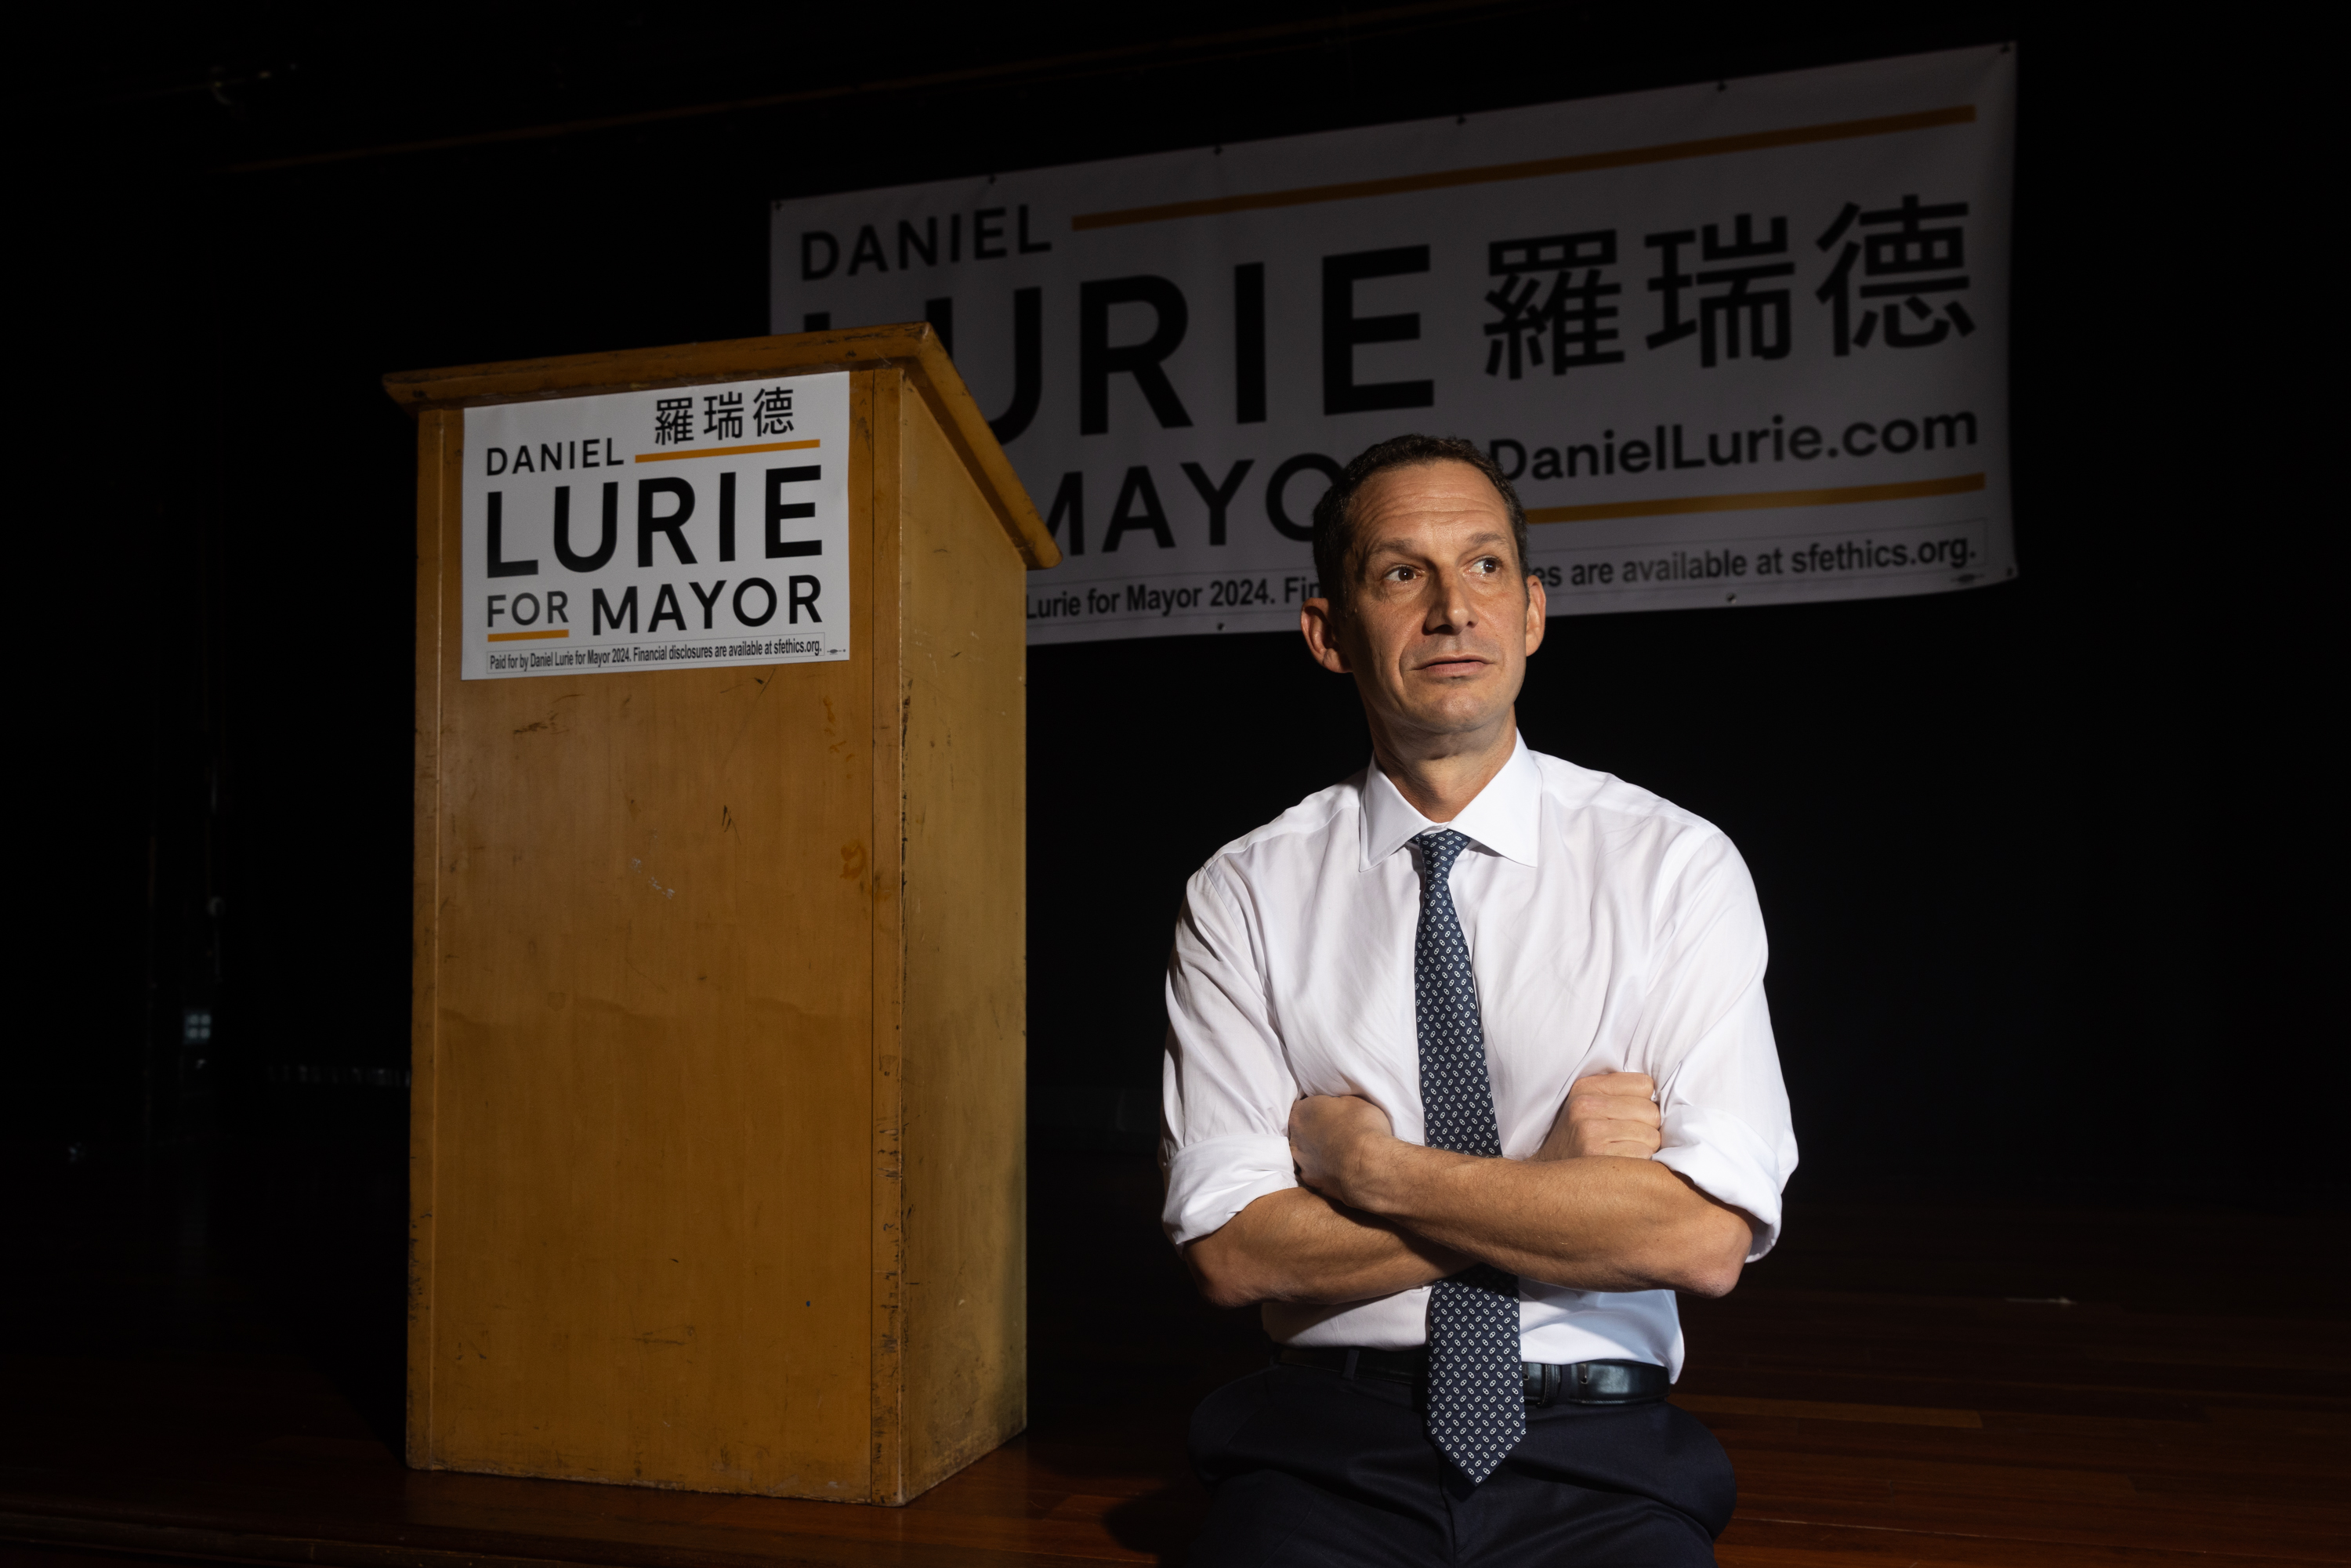 Daniel Lurie sits next to a podium with "Daniel Lurie for Mayor" signs, his arms crossed, wearing a shirt and tie.